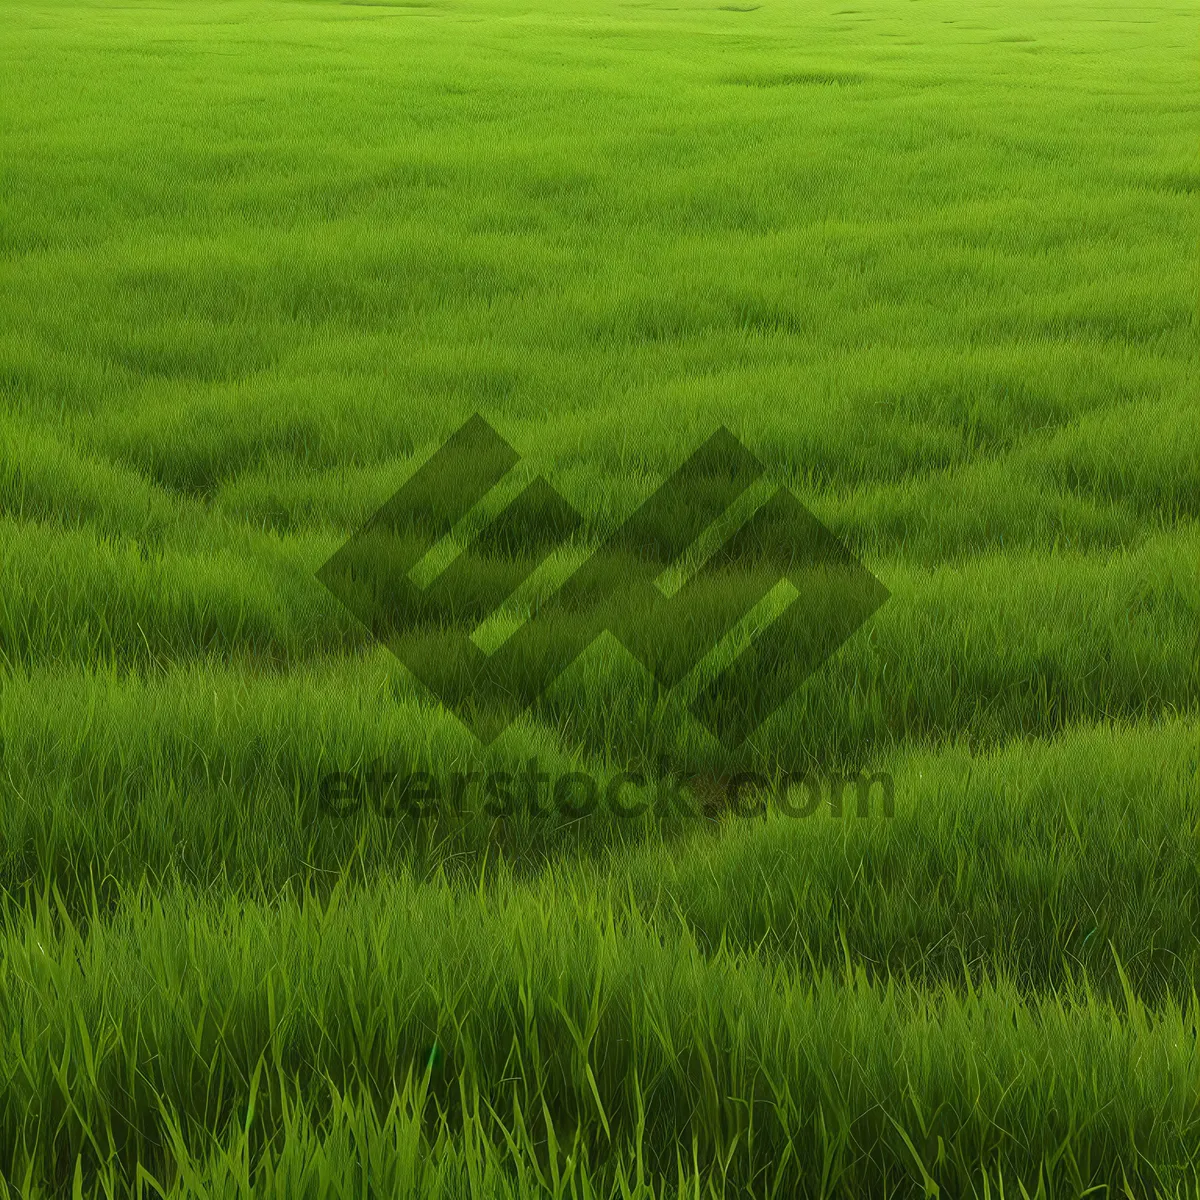 Picture of Vibrant Wheat Field Under Sunny Summer Sky